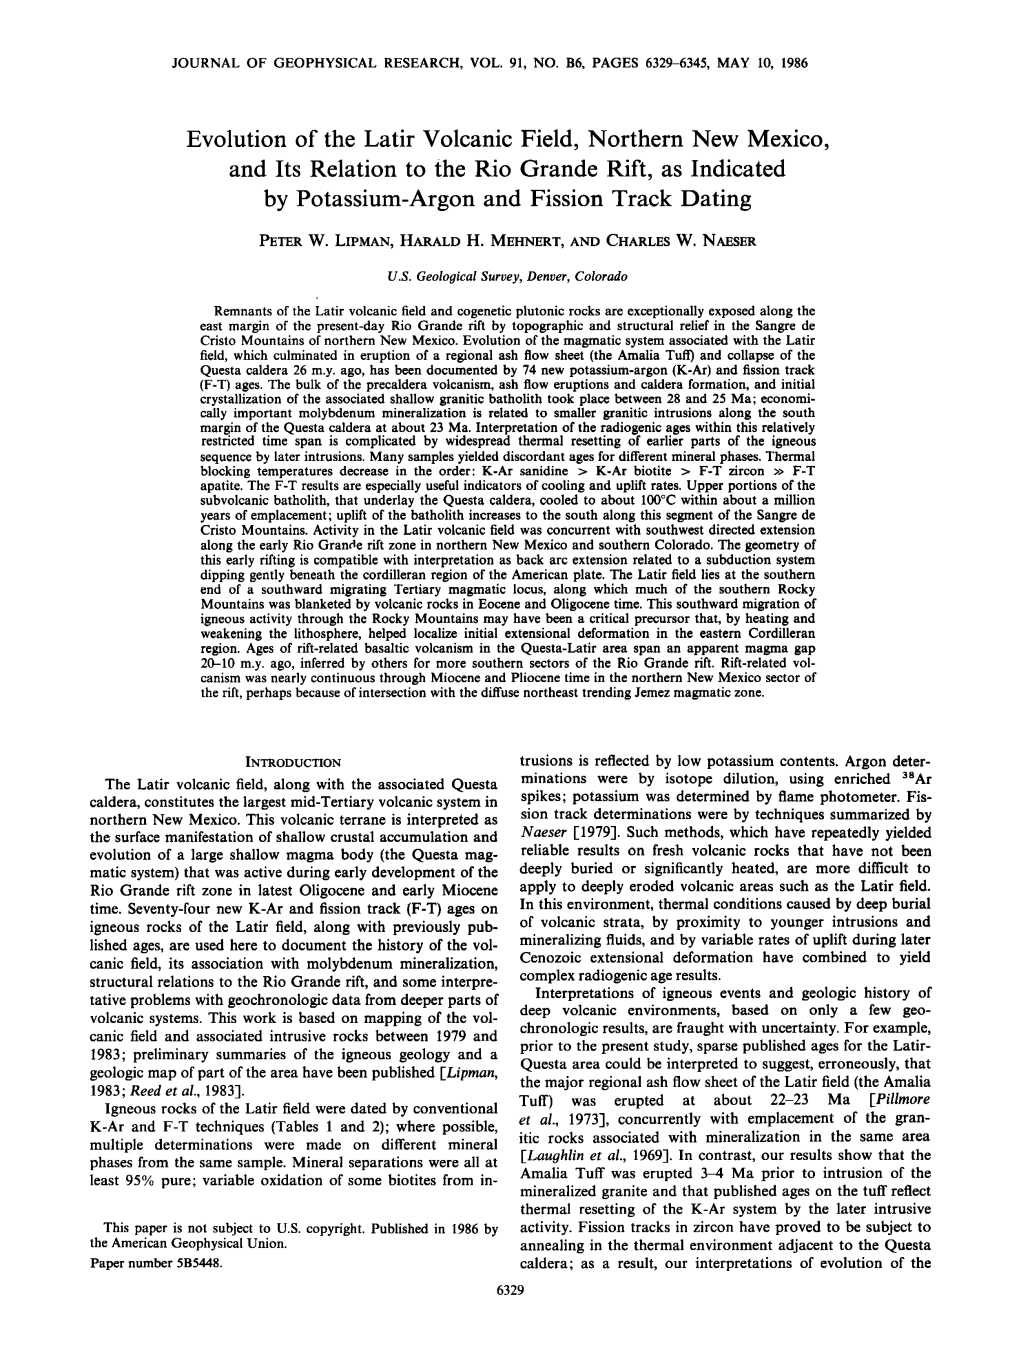 Evolution of the Latir Volcanic Field, Northern New Mexico, and Its Relation to the Rio Grande Rift, As Indicated by Potassium-Argon and Fission Track Dating